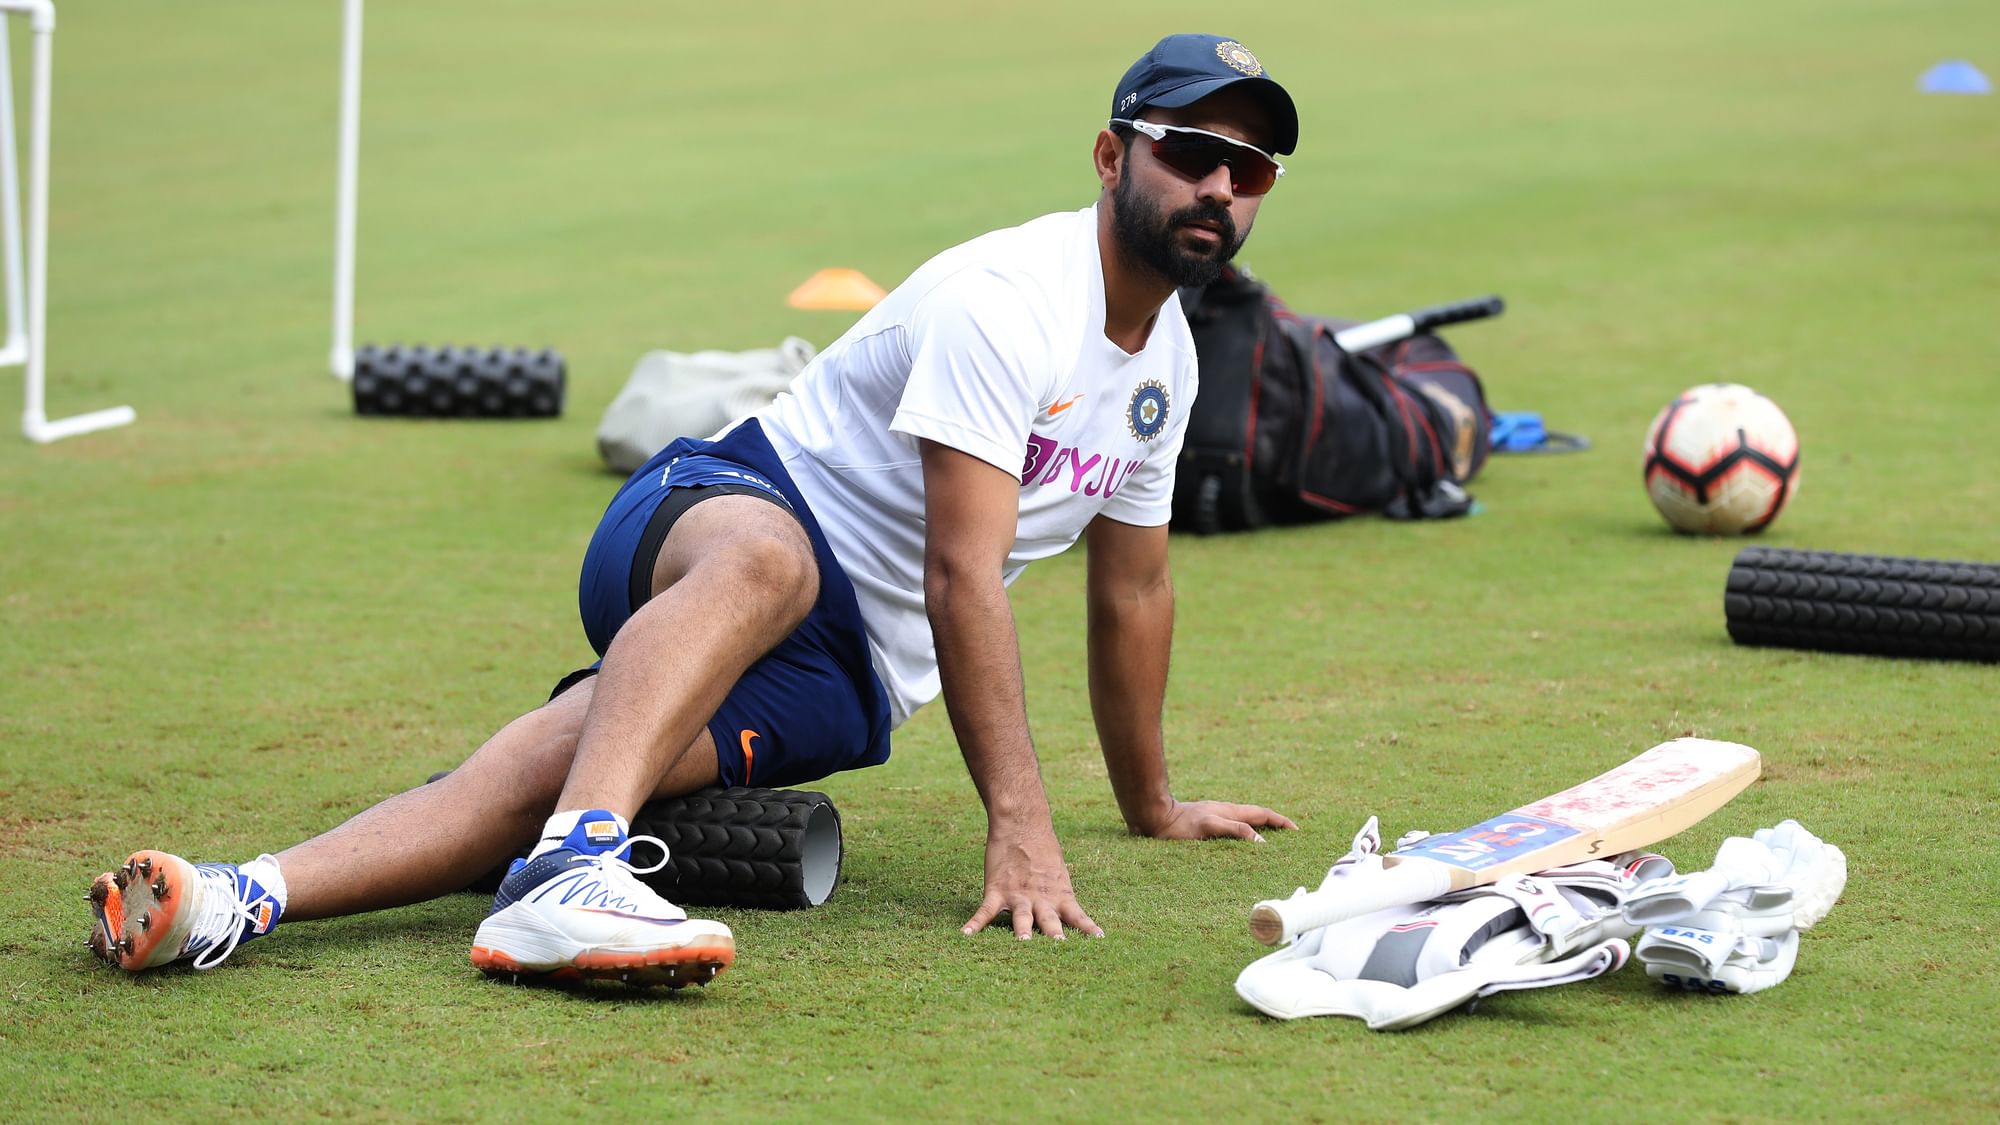 On Sunday, India’s Test vice-captain Ajinkya Rahane posted a video of him working out with a hashtag “NoOffDays”, which is often used by Kohli in posts of his gym sessions.